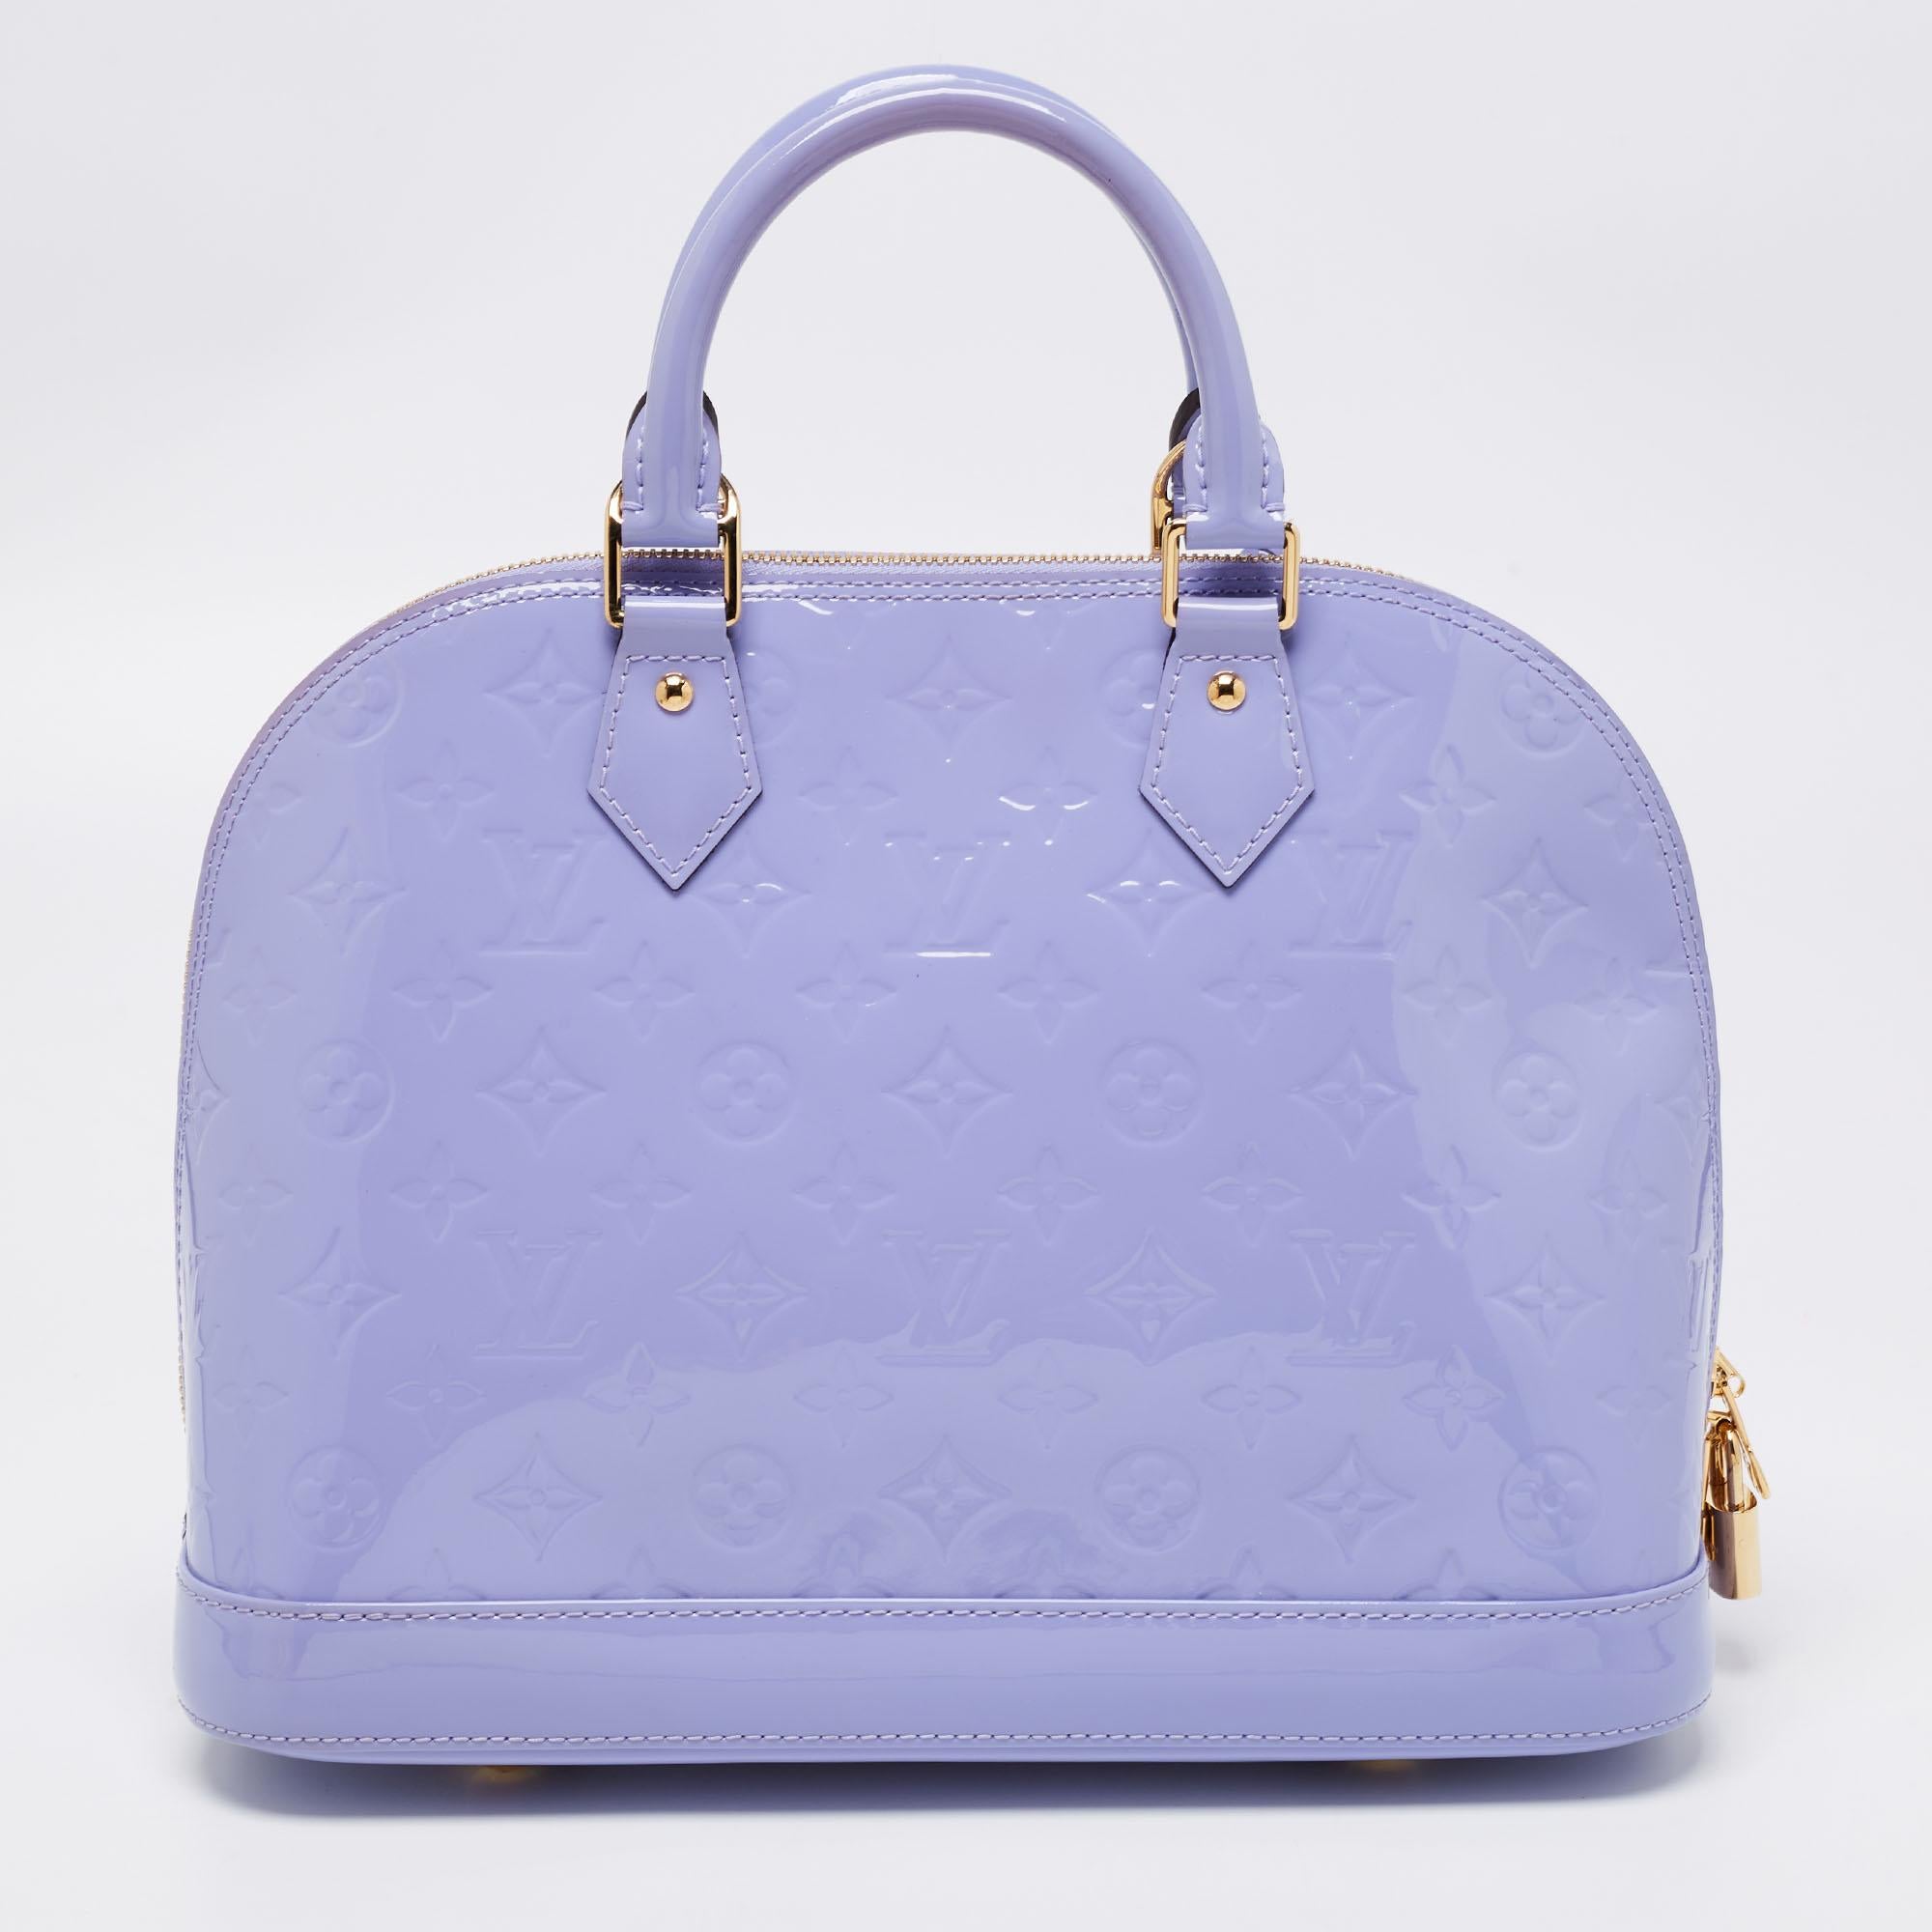 Out of all the irresistible handbags from Louis Vuitton, the Alma is the most structured one. It is a classic that has received love from fashion icons. This piece comes crafted from lilac-hued patent leather, featuring a zip closure with a padlock